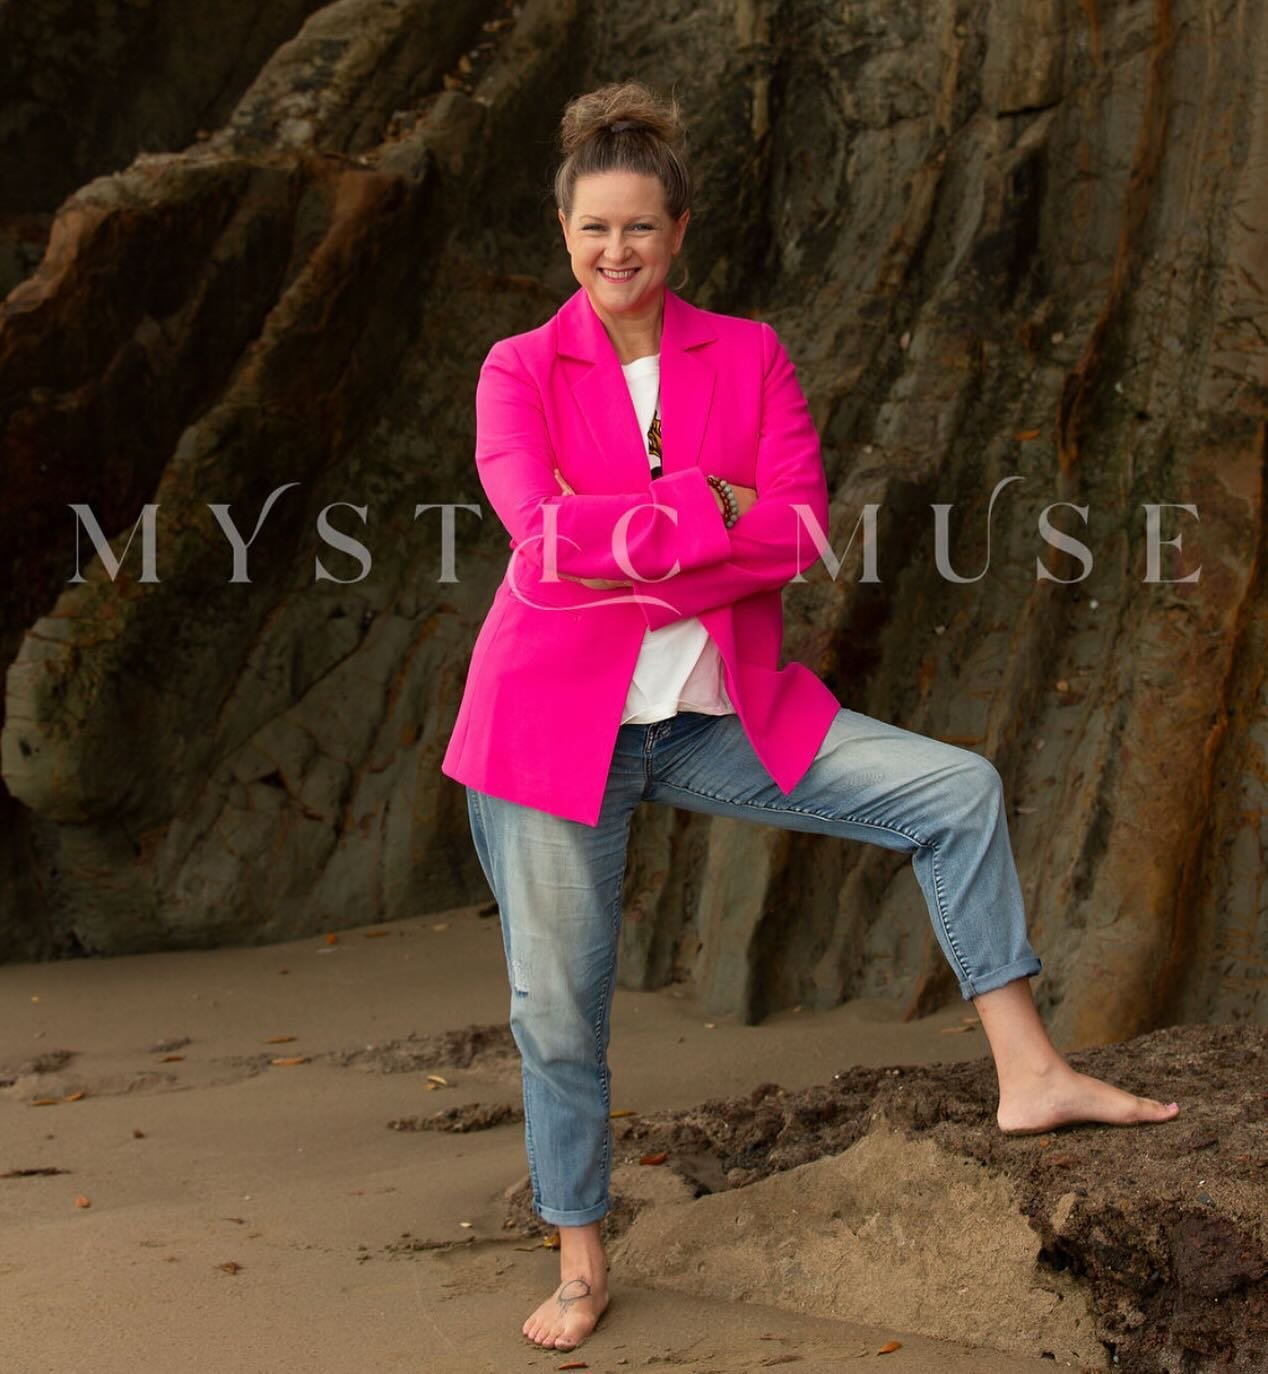 The WILD Executive ⚡️
&hellip;it&rsquo;s time to be bolder, louder and stand tall ladies!

UNAPOLOGETIC ✨🔥

Loving the new branding shoots from 
@mystic_muse_photography 

#wildwoman #wildexecutive #womeninbusiness #feminineleadership #leadershipcoa